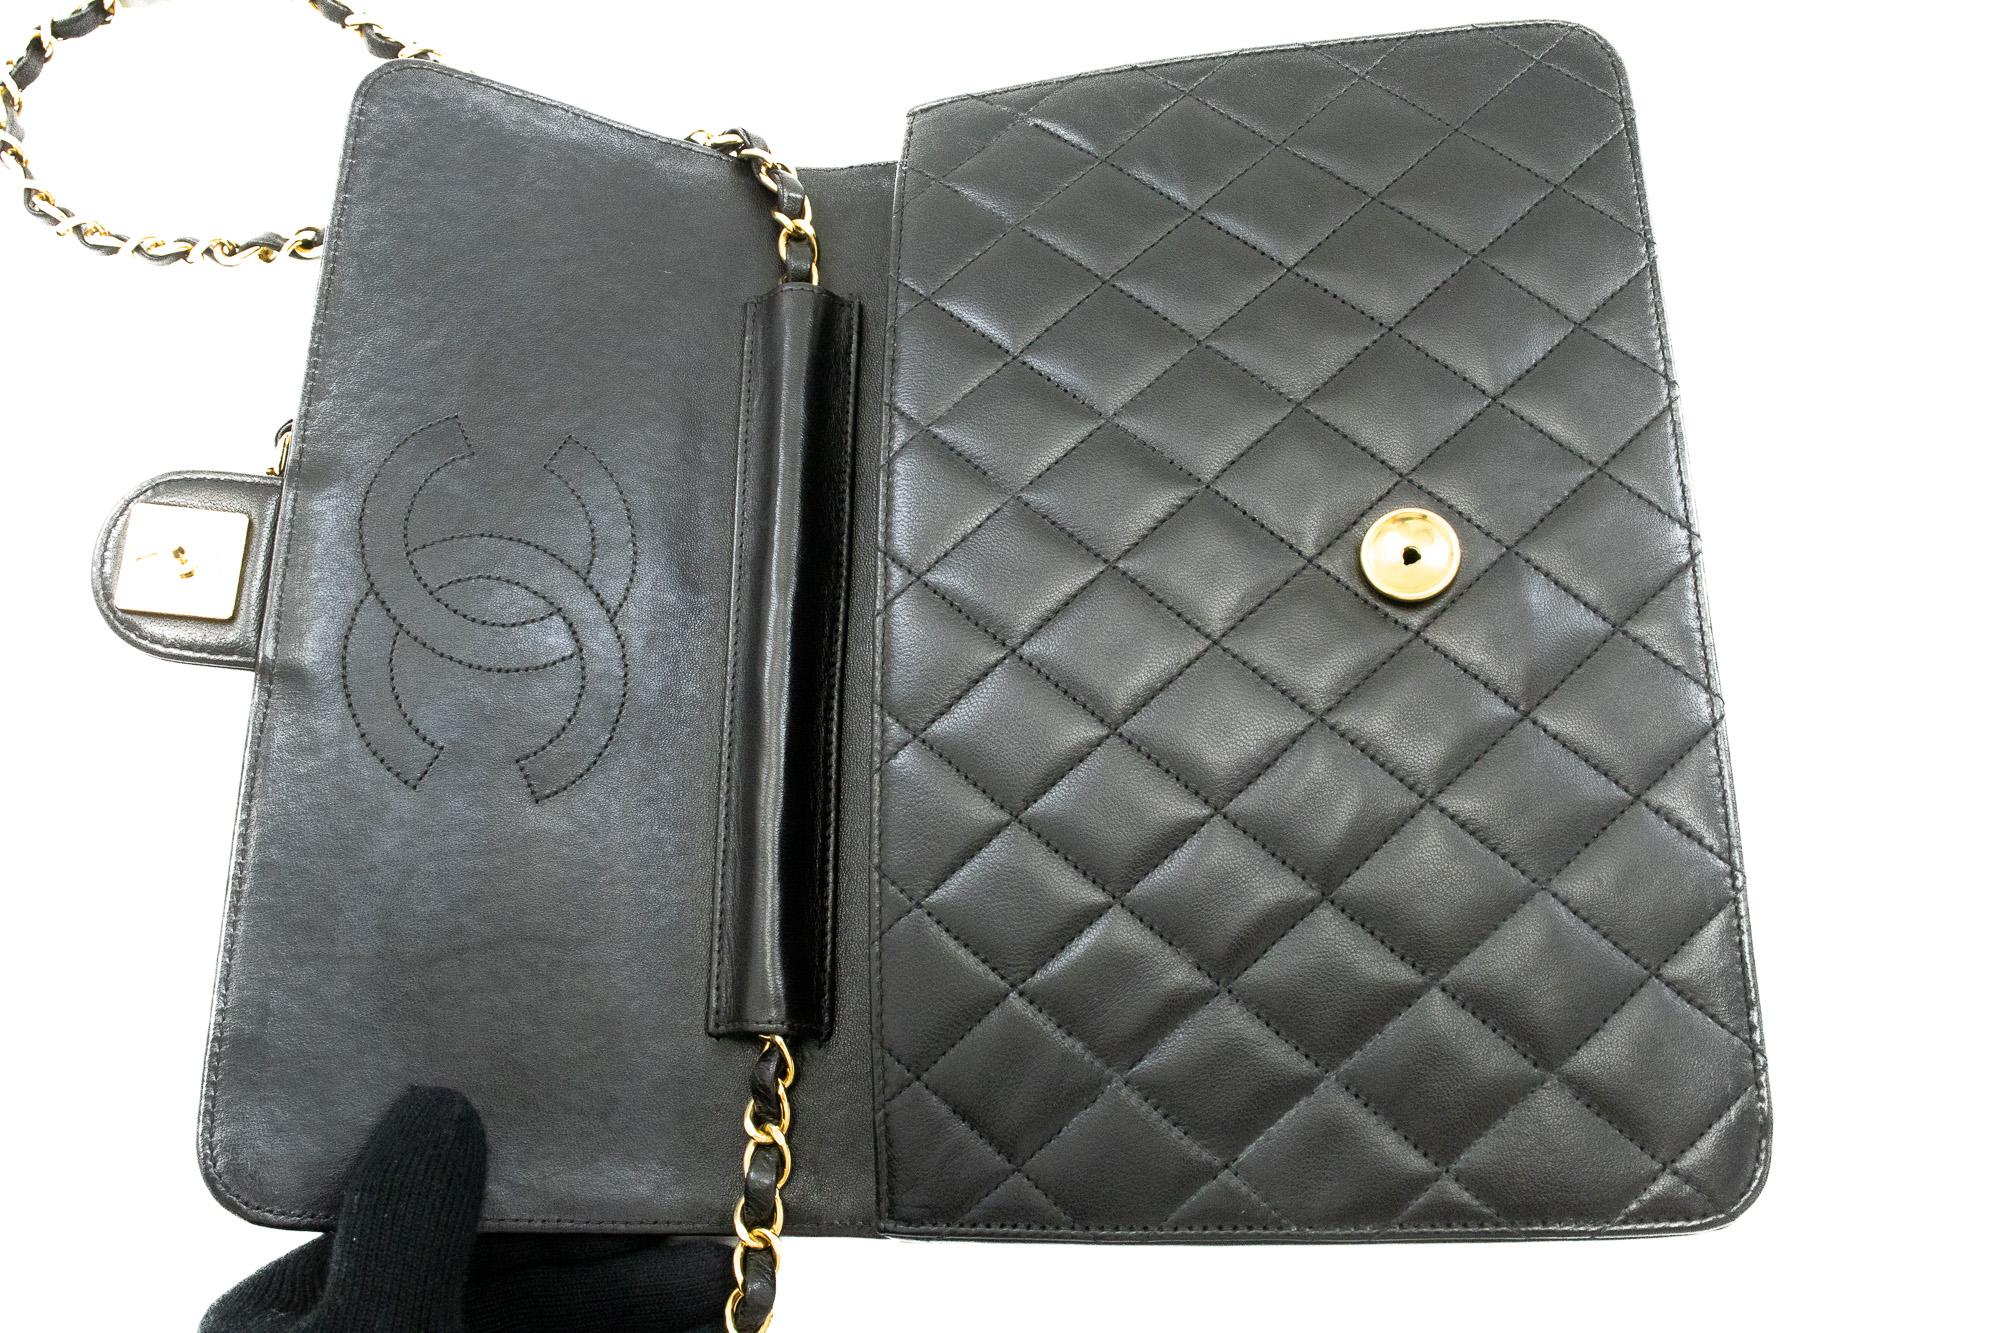 CHANEL Chain Shoulder Bag Black Clutch Flap Quilted Purse Lambskin 6